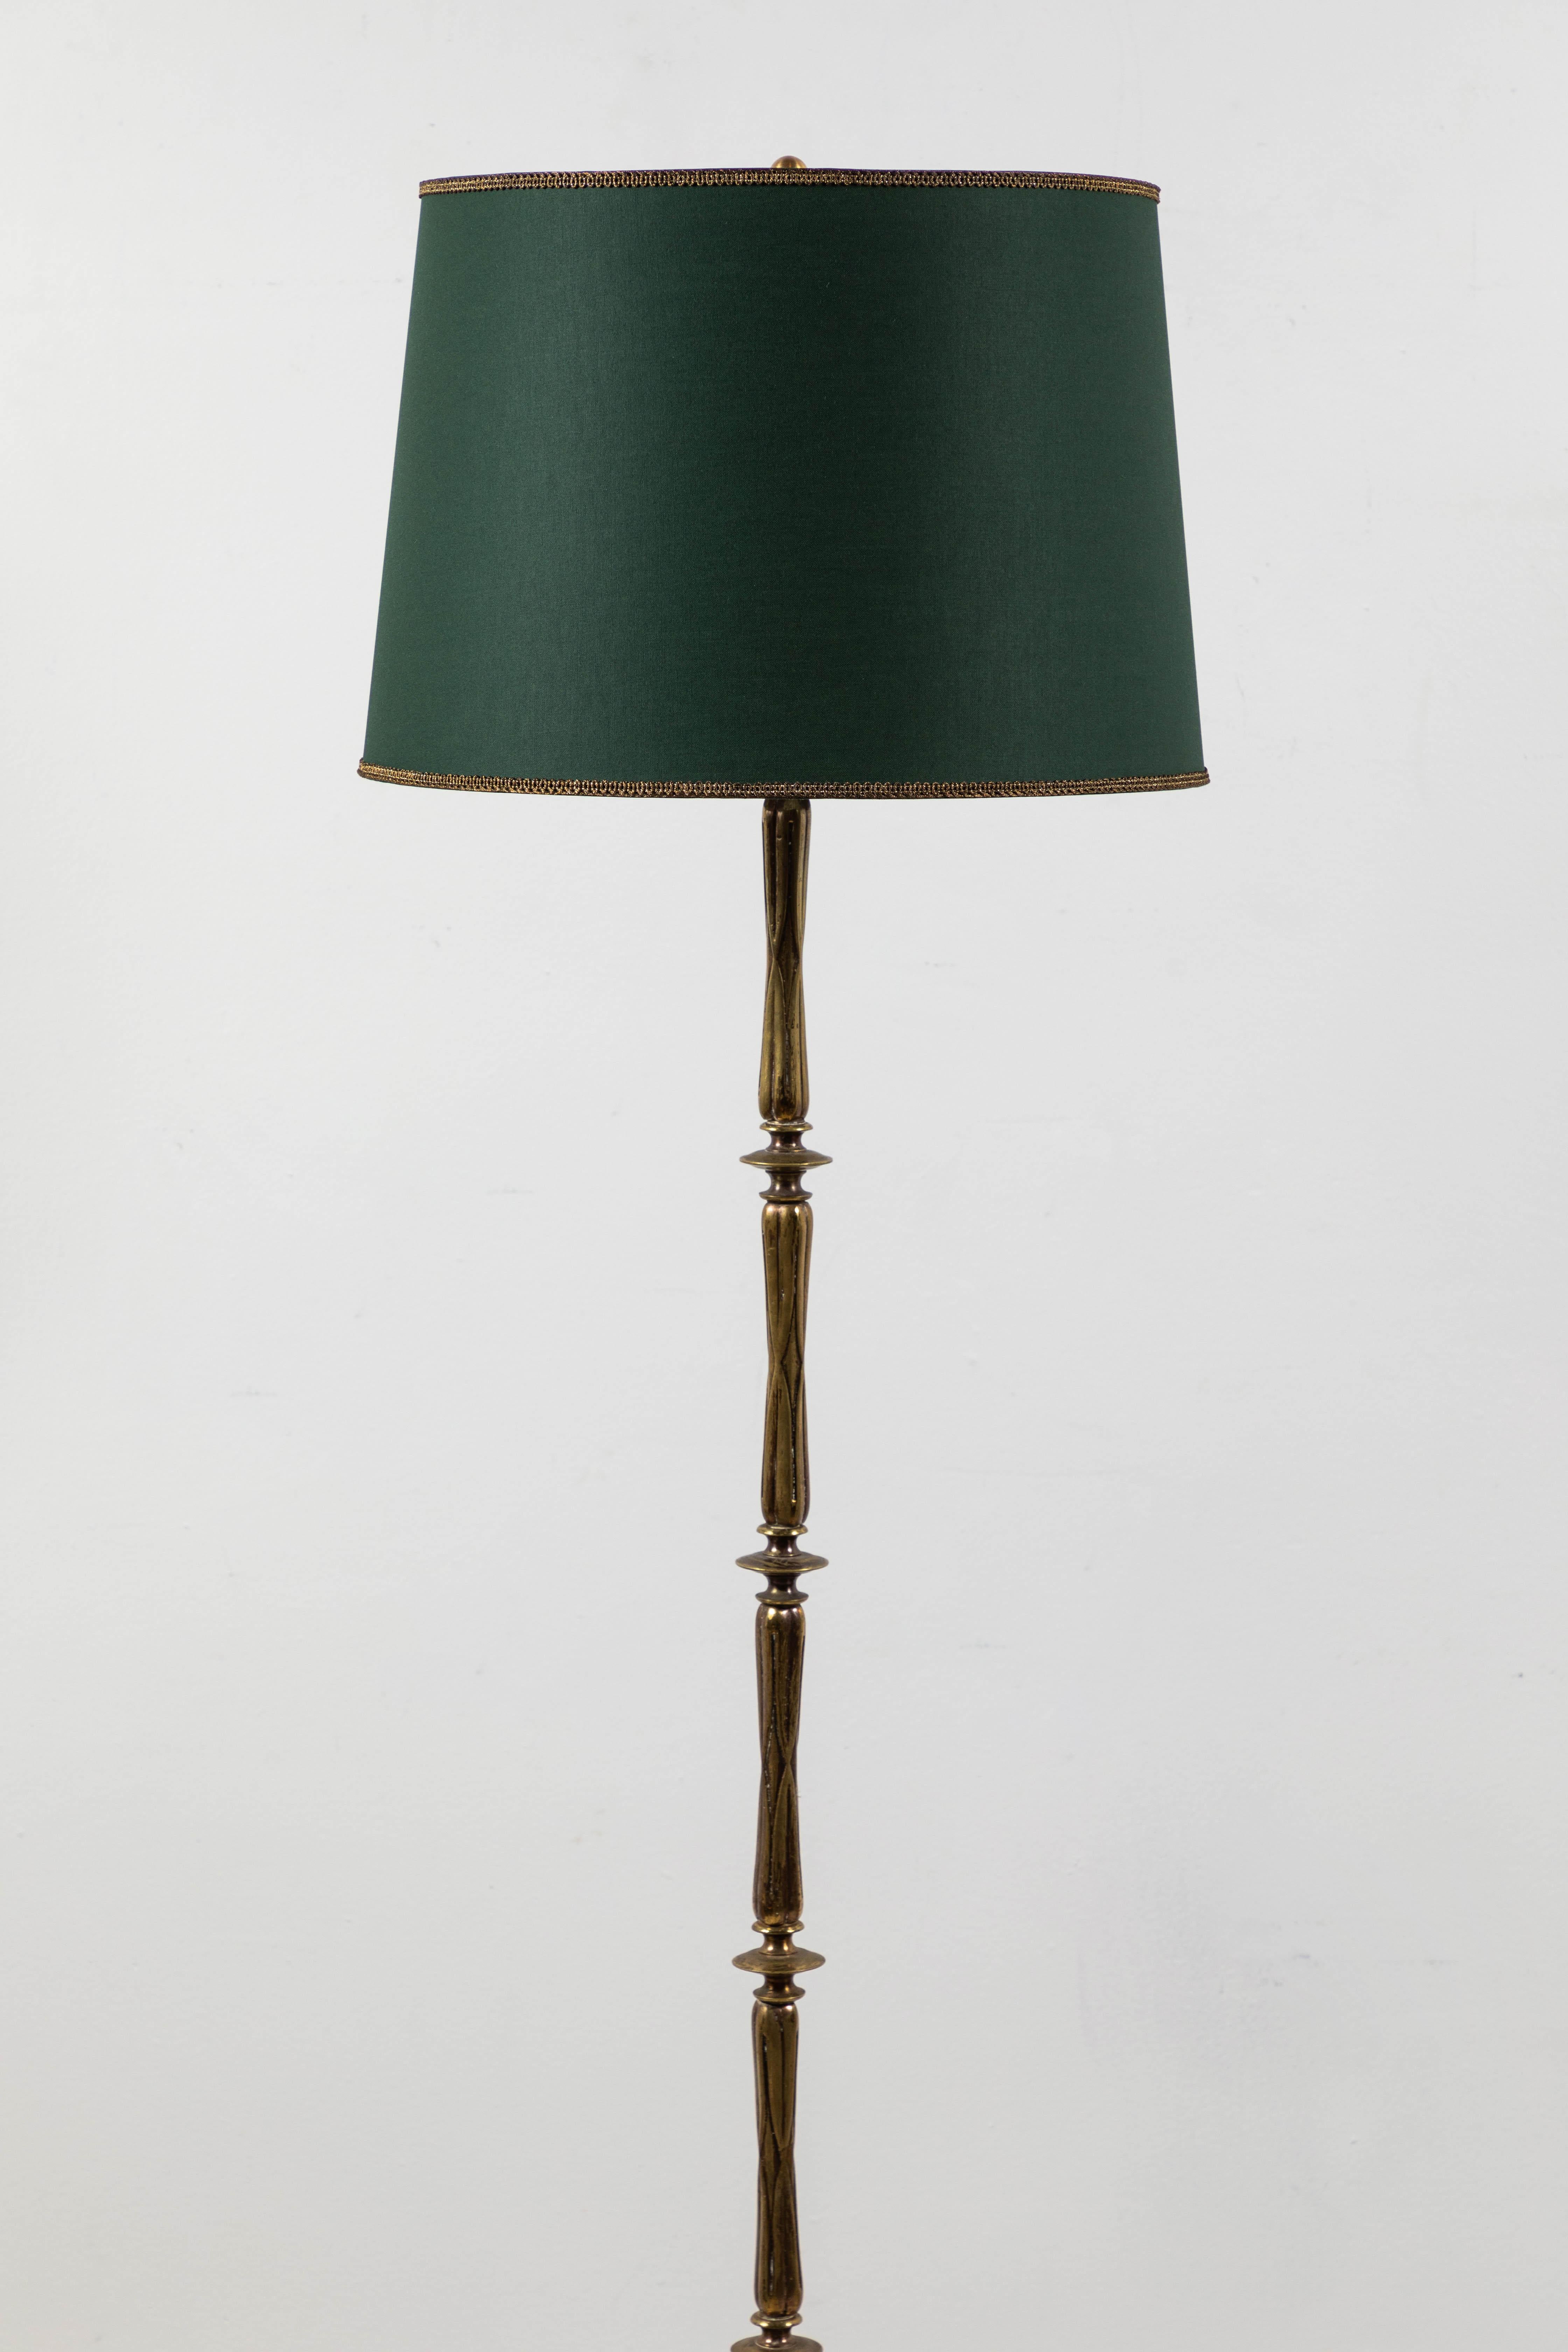 French turned brass floor lamp with tripod base and green book cloth shade with gold trim.